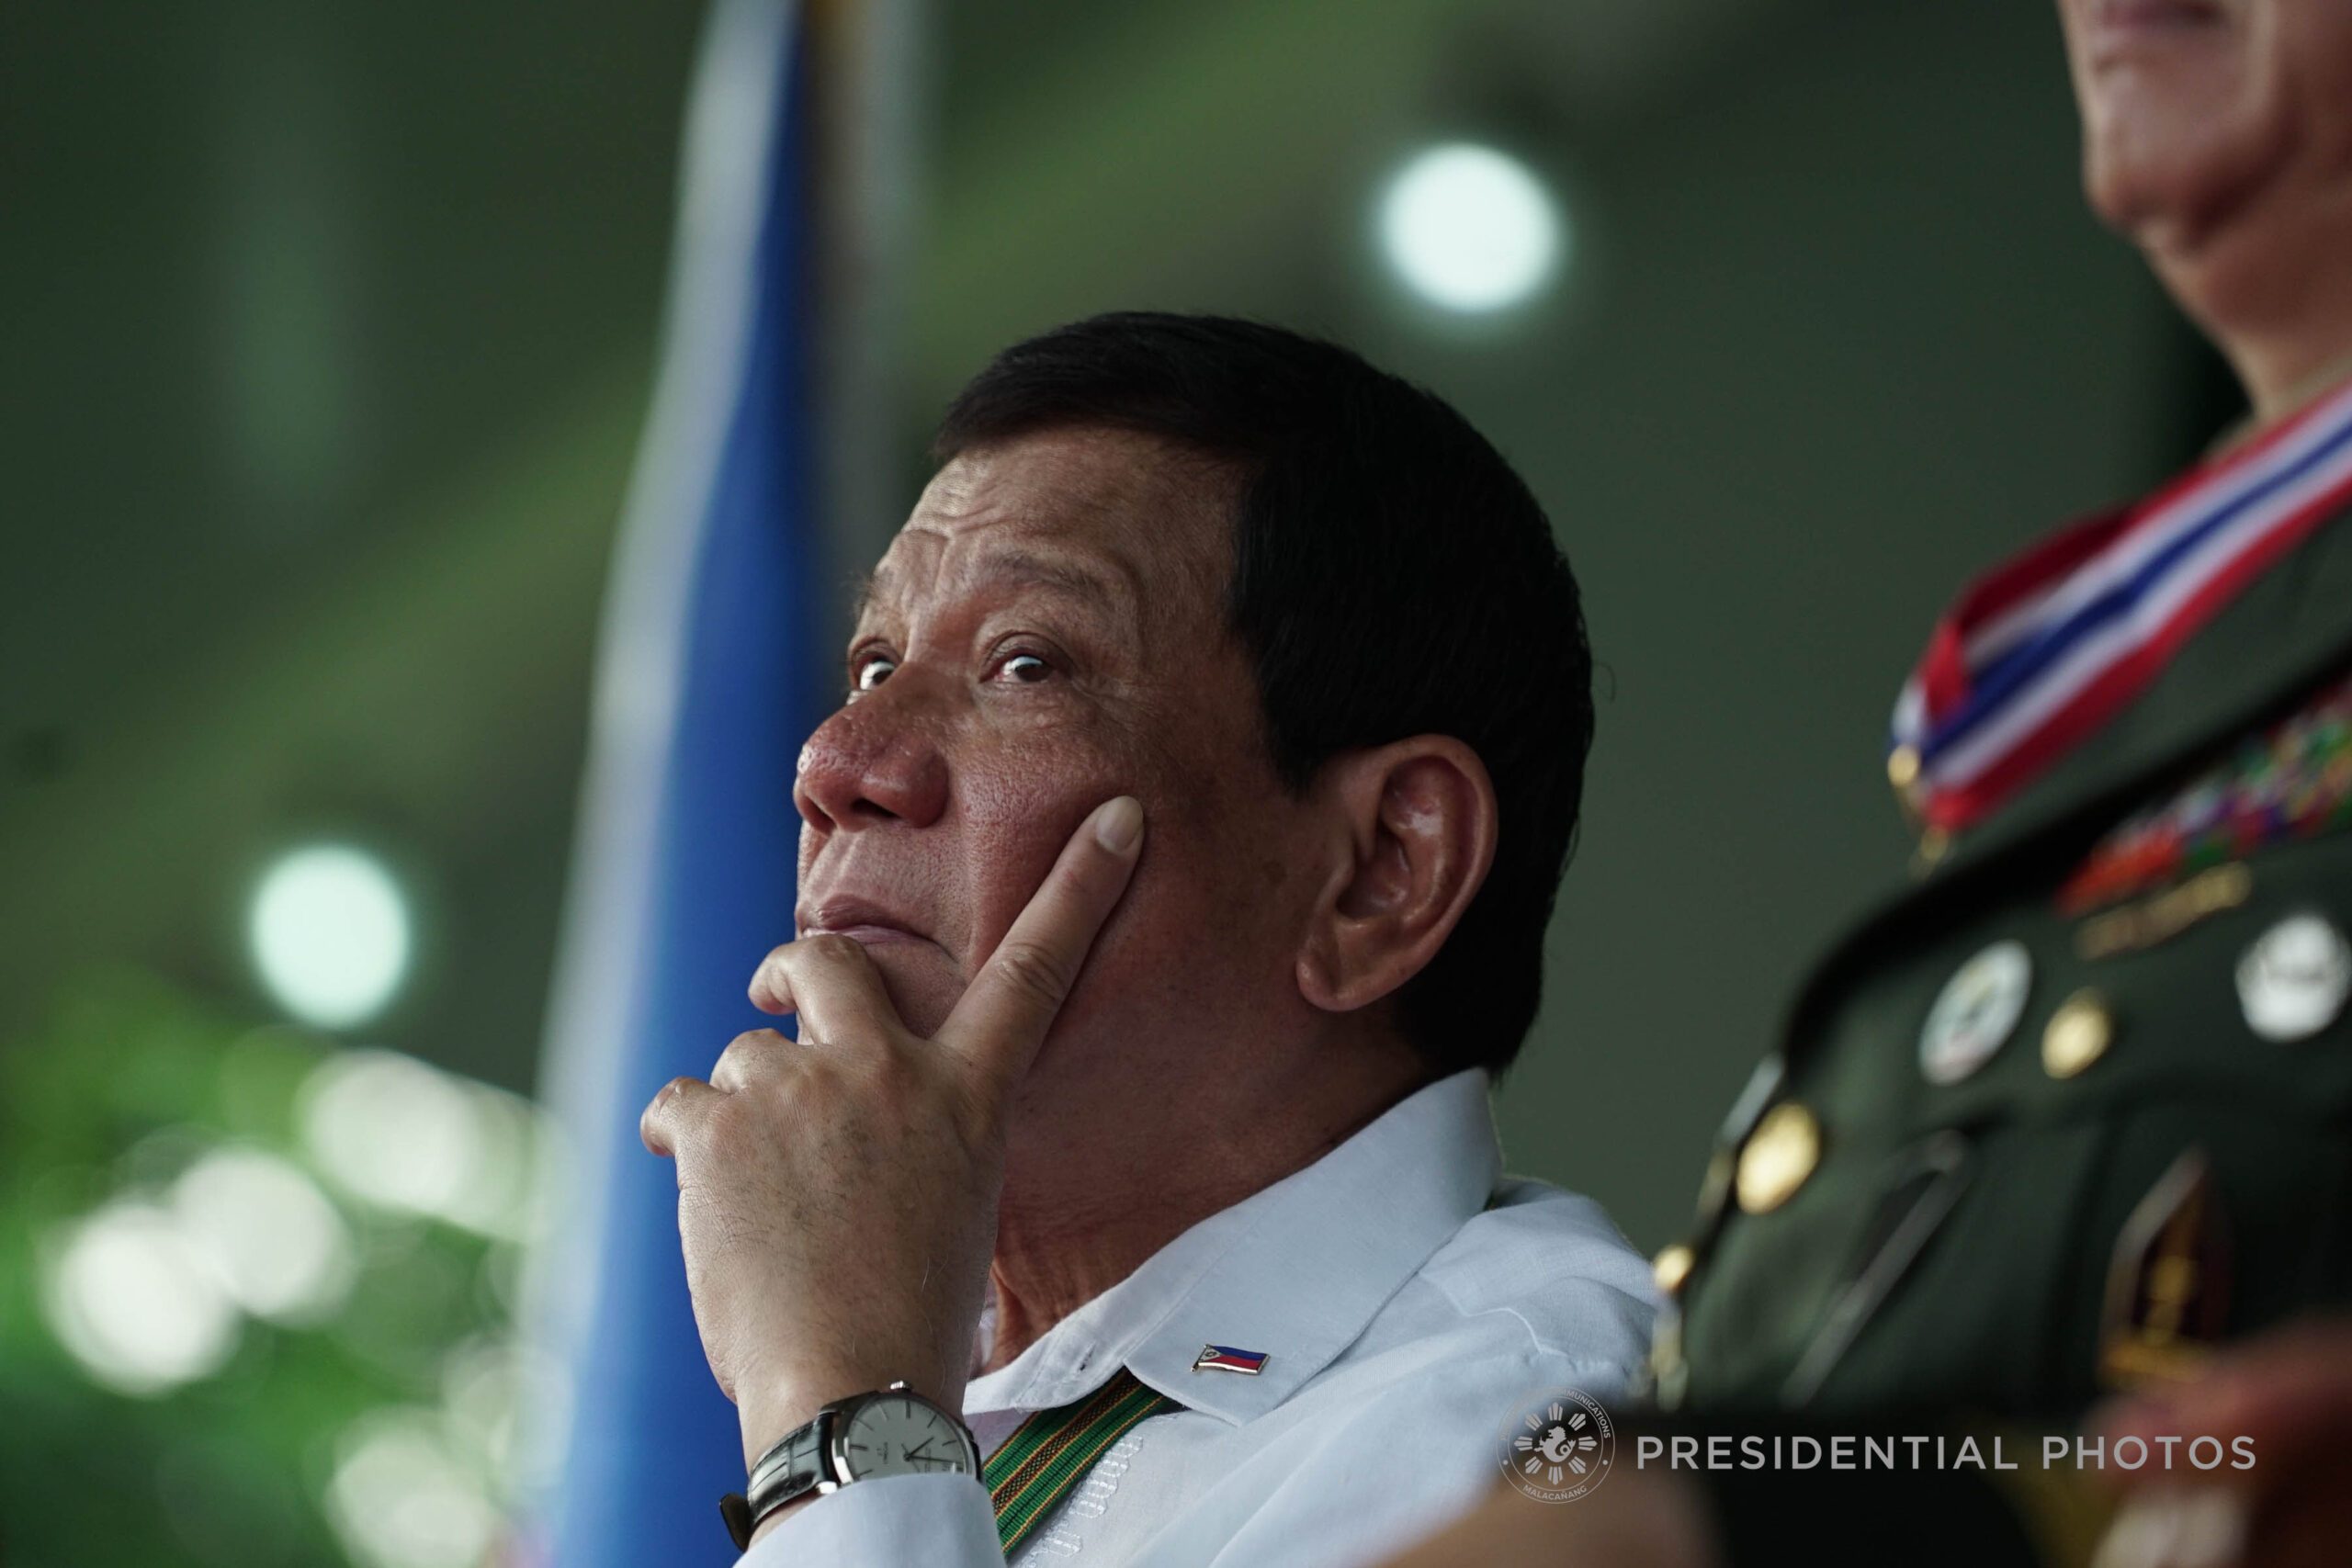 Duterte says he hopes China will not build on Scarborough Shoal